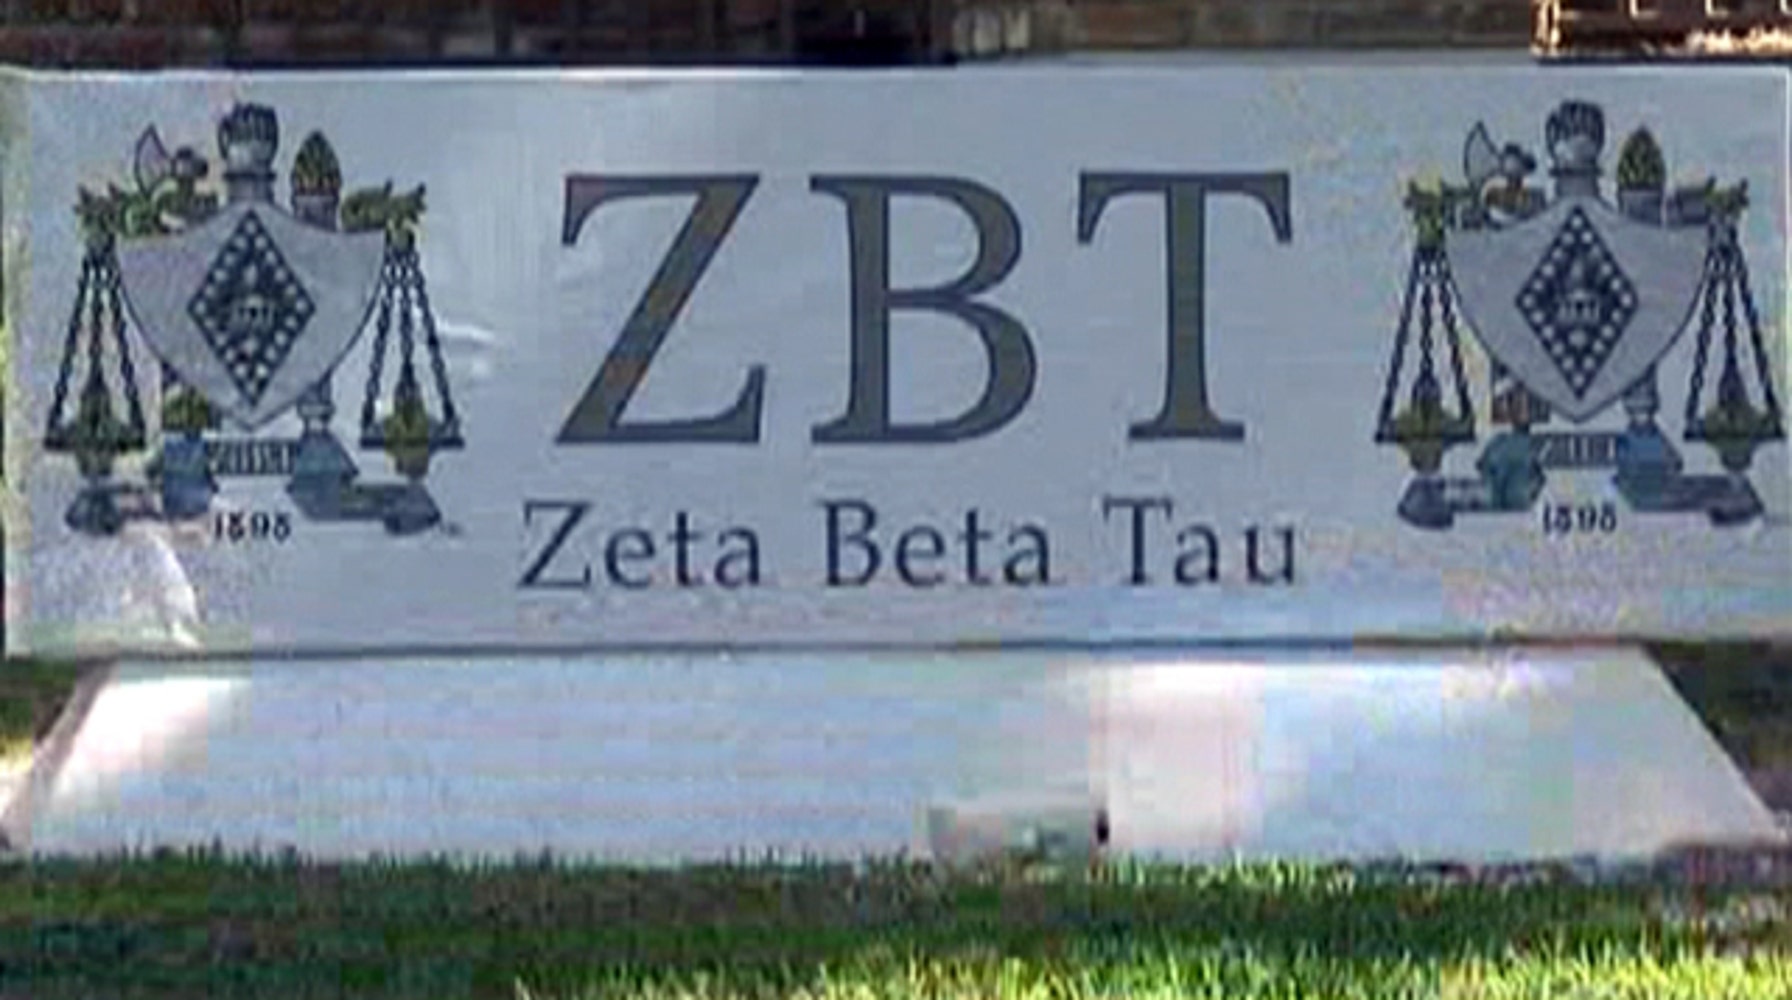 University of Florida Frat Thrown Off Campus for Alleged Veteran Abuse